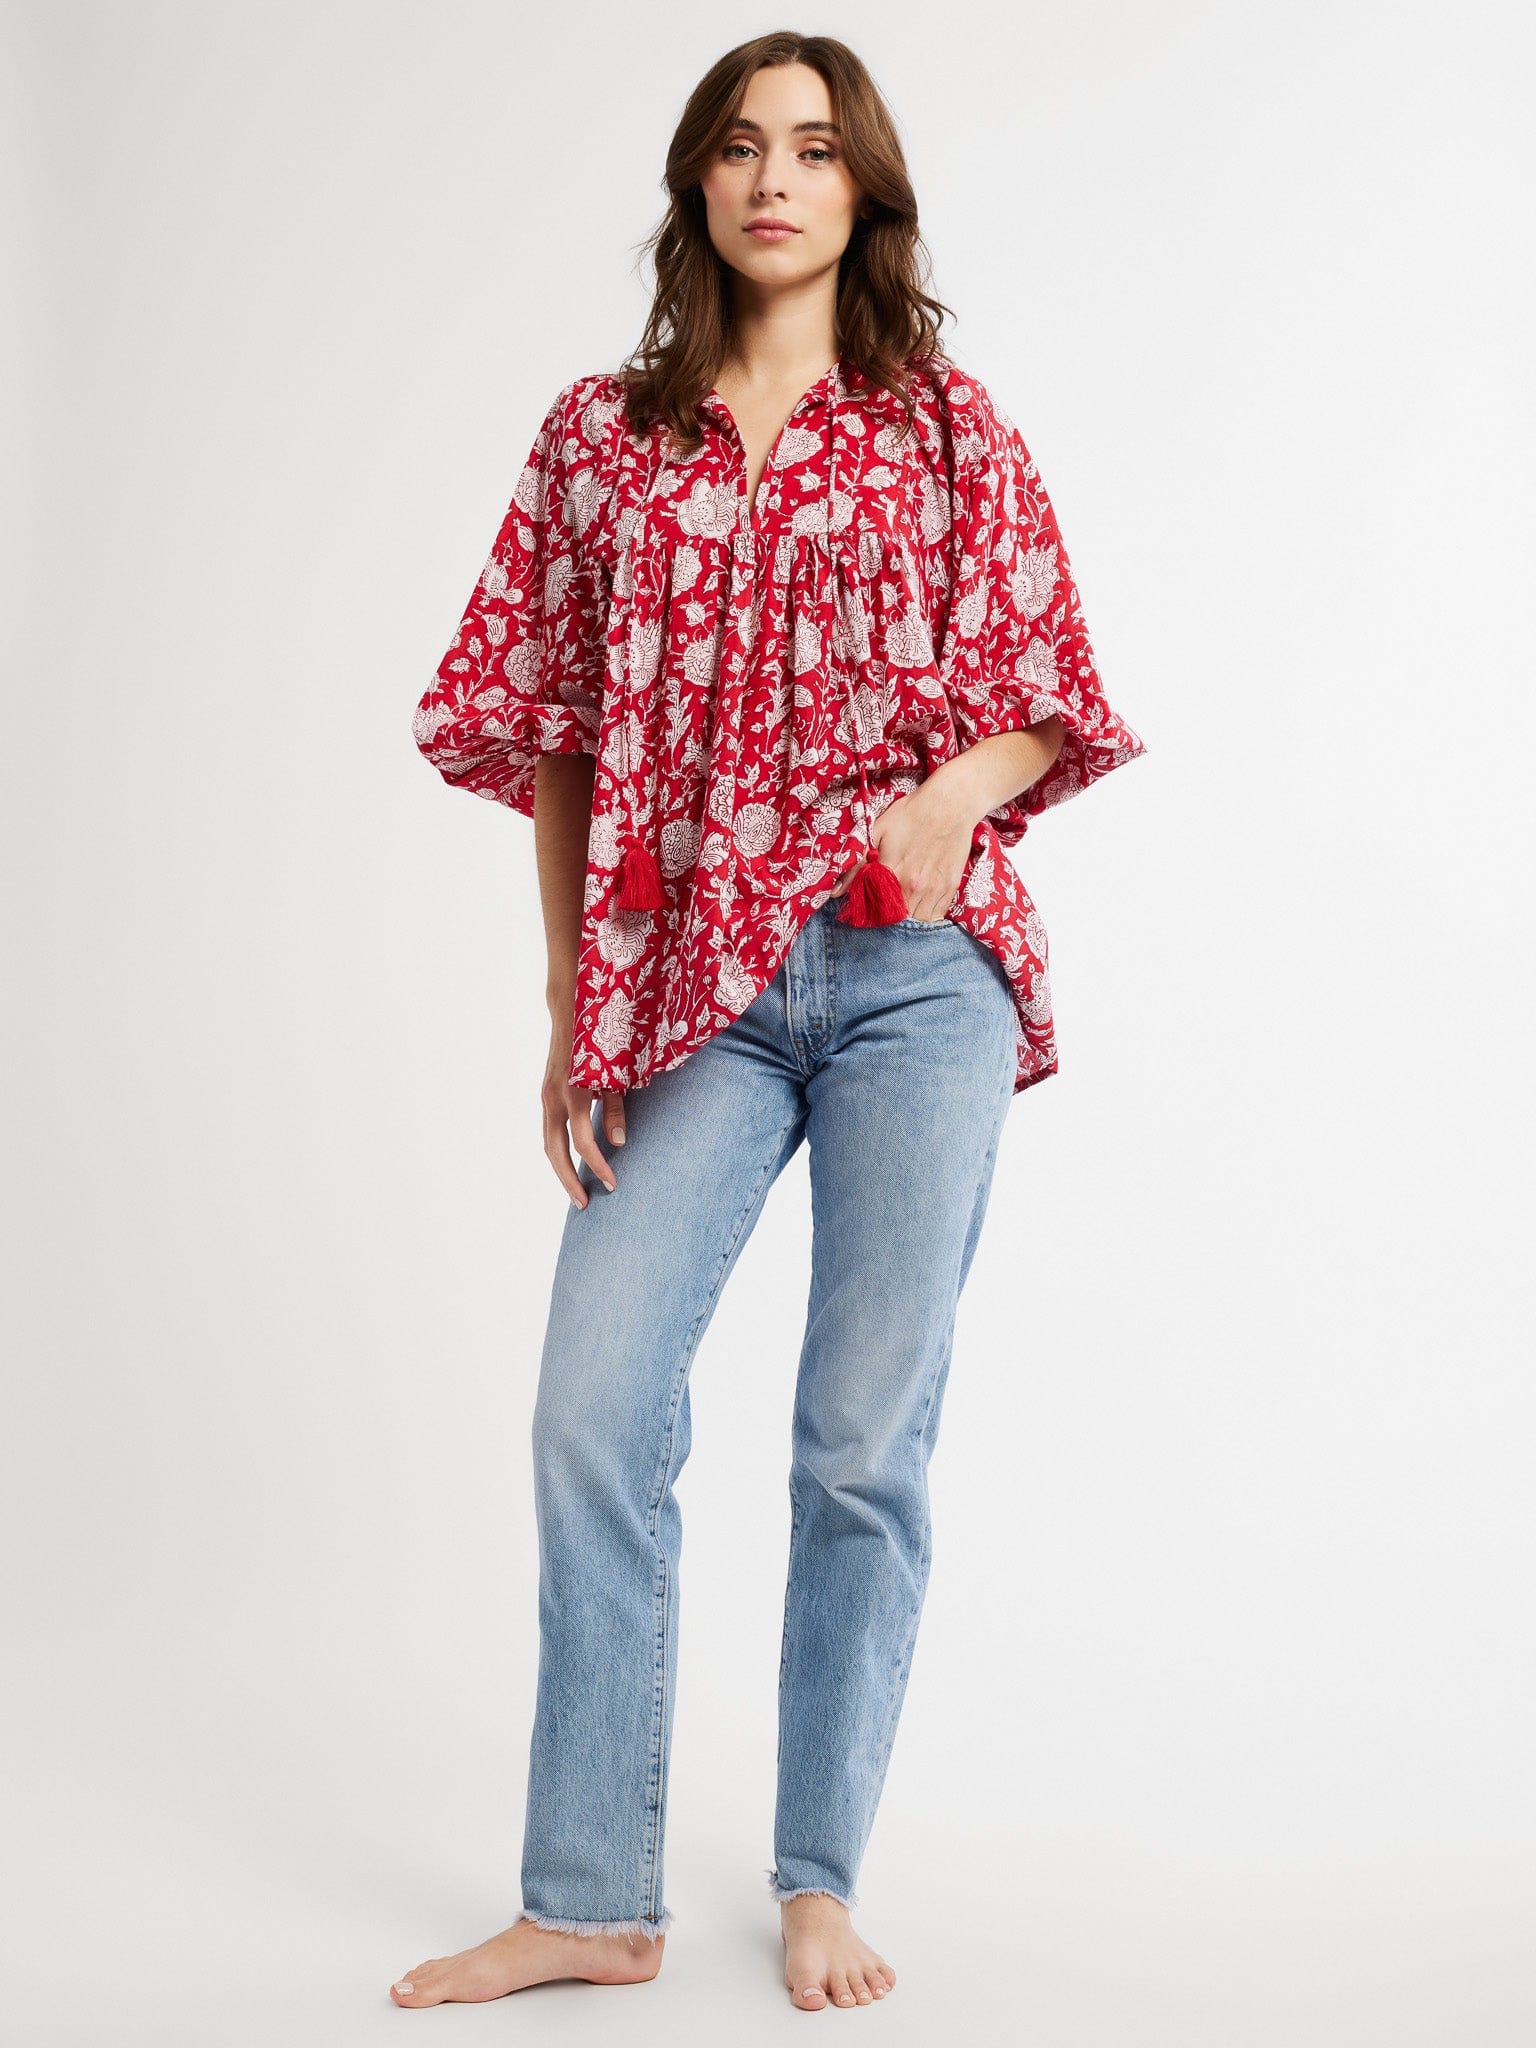 MILLE Clothing Charlie Top in Red Zinnia